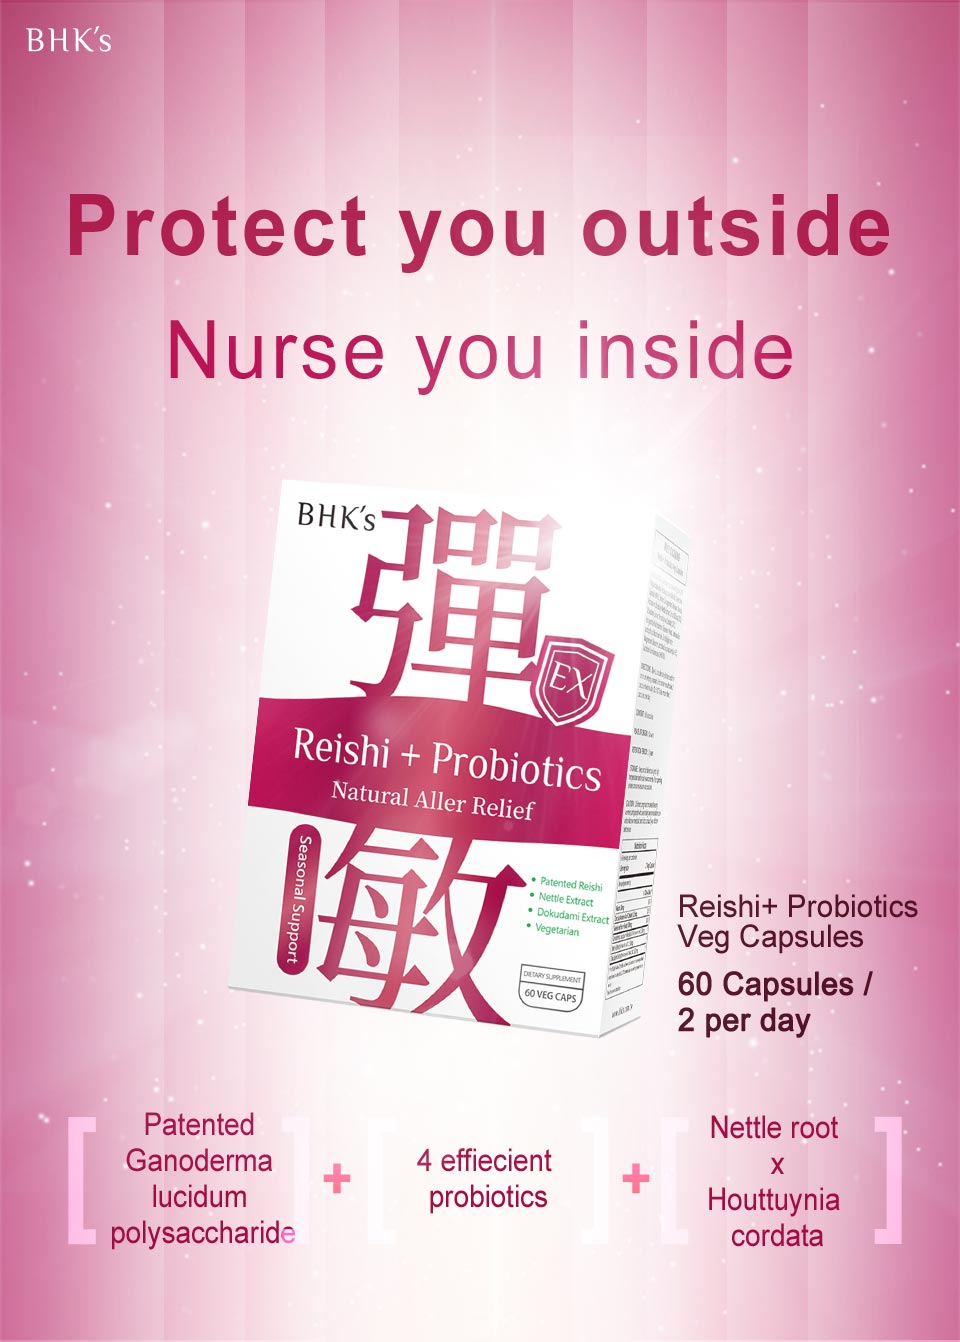 BHKs Reishi contains ganoderma lucidum, probiotics, and nettle root that help to fight allergy symptoms.